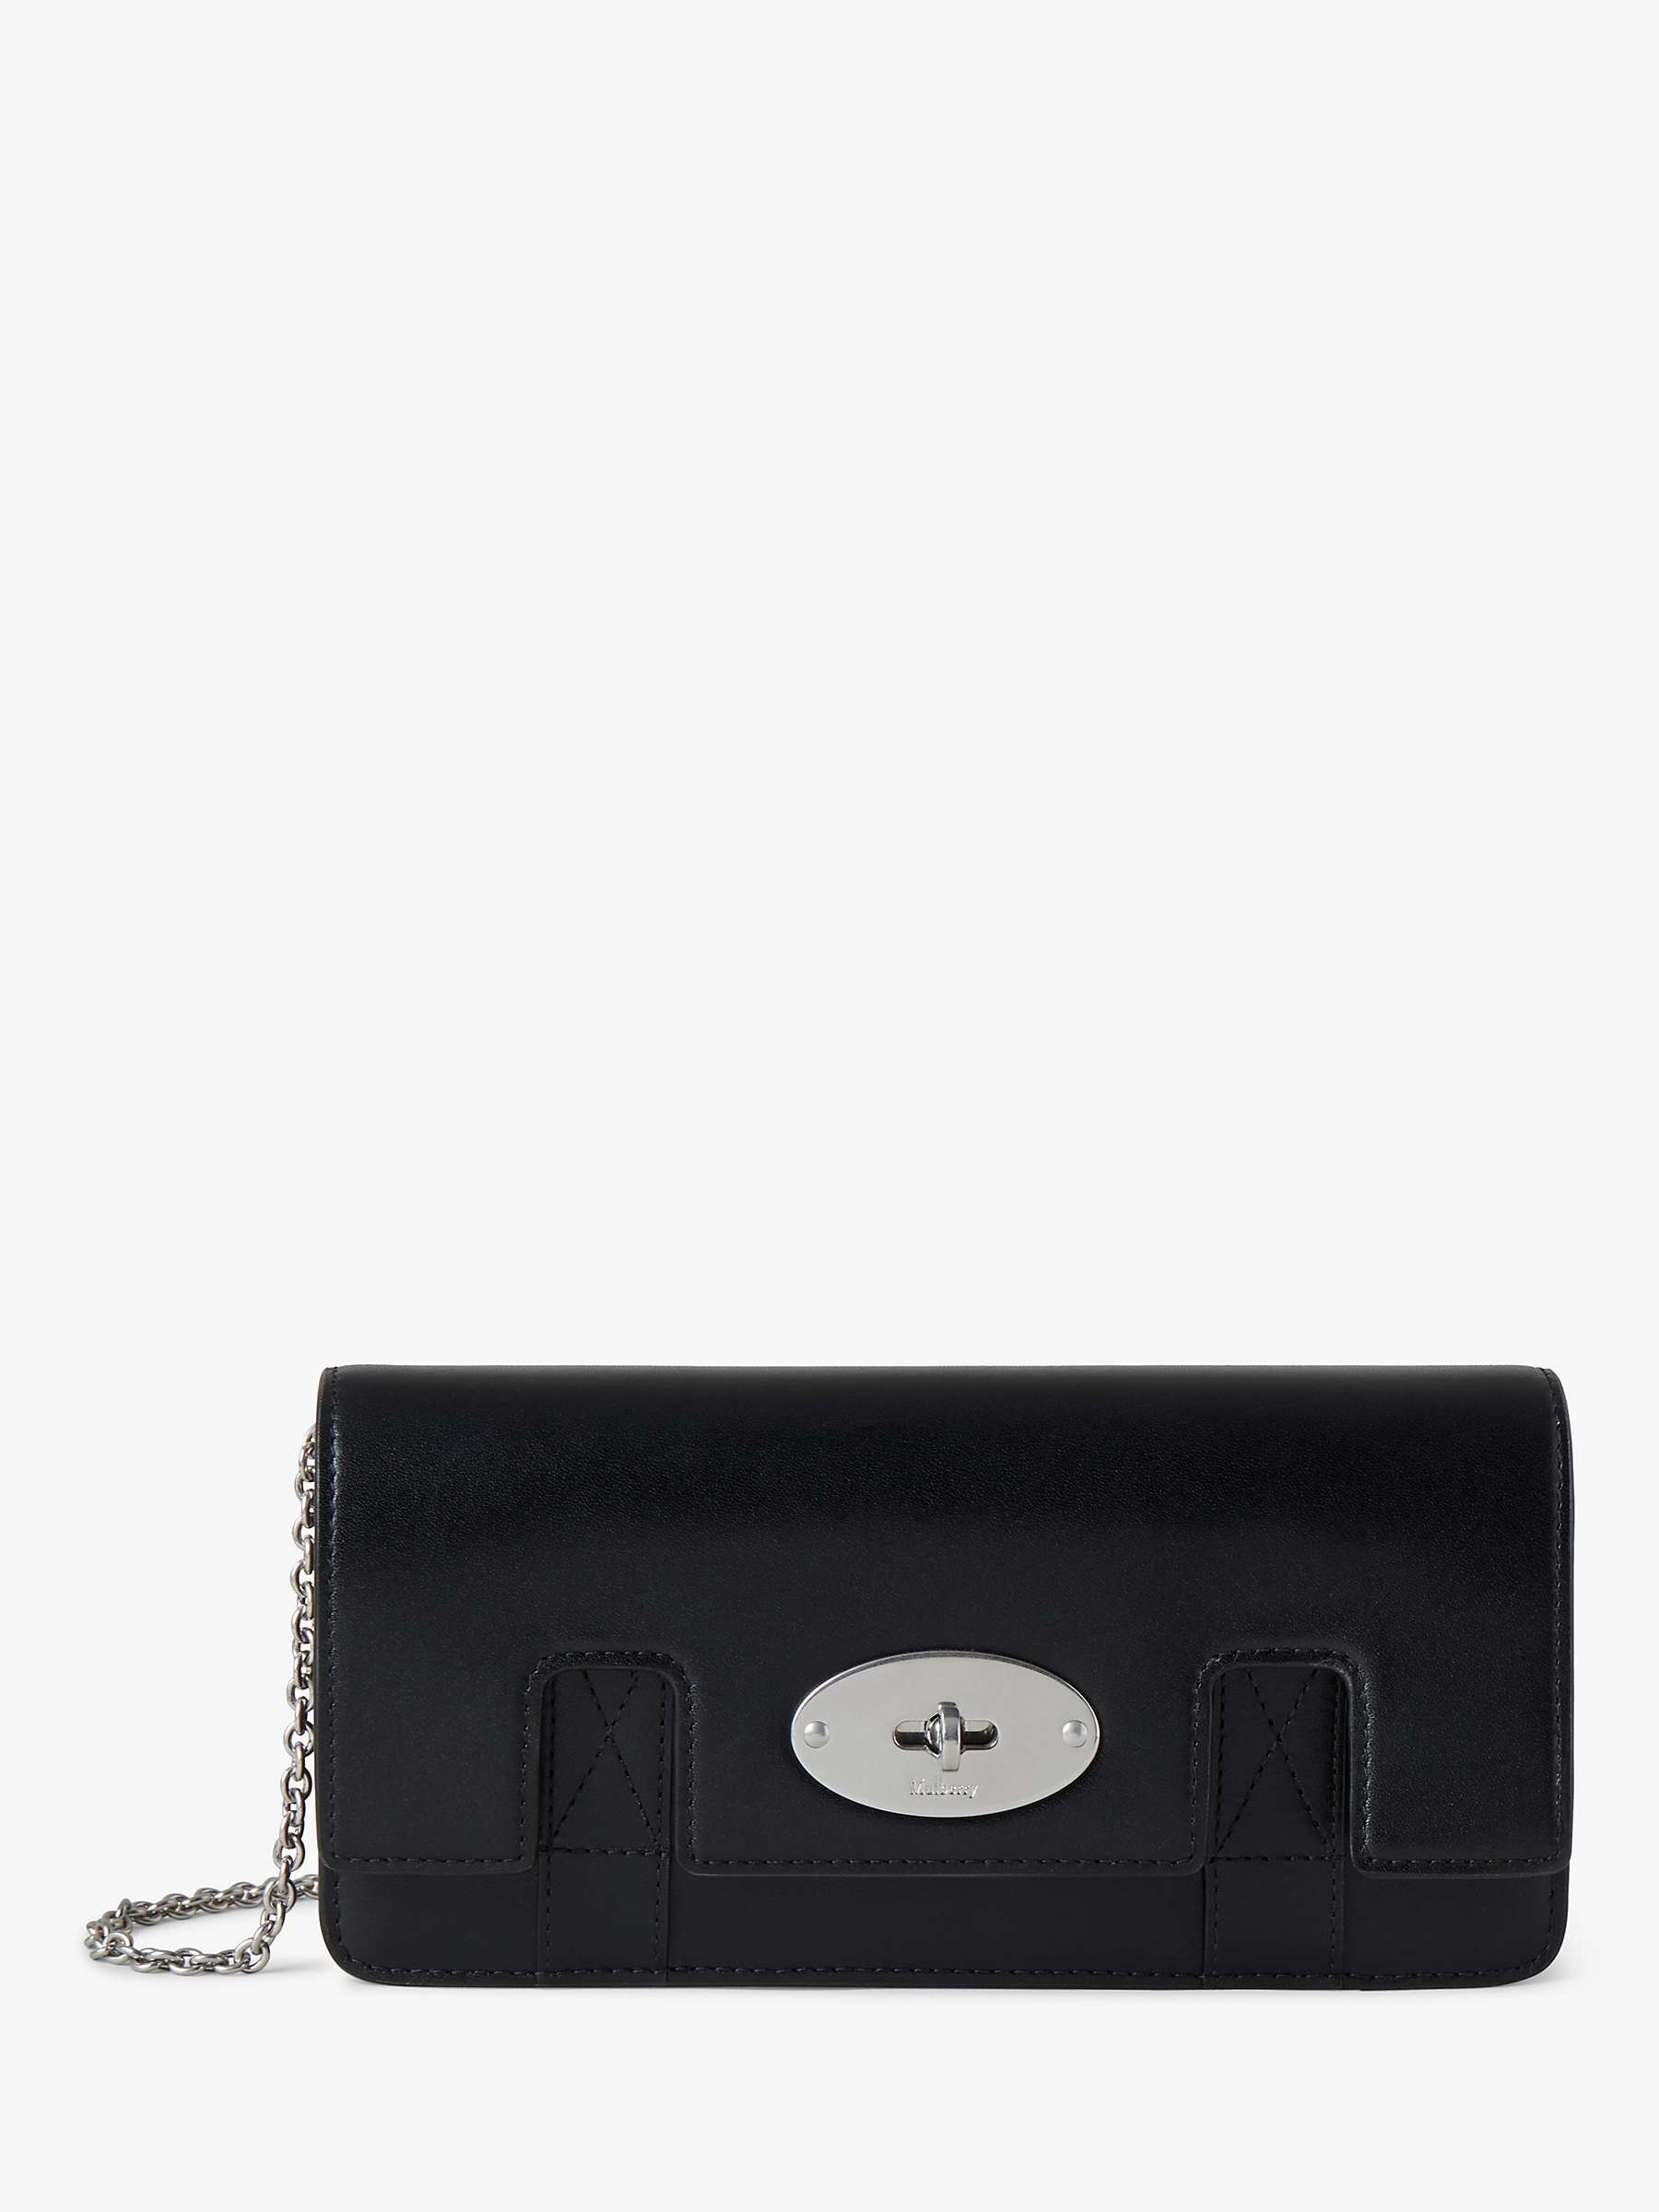 Buy Mulberry East West Bayswater Clutch Online at johnlewis.com